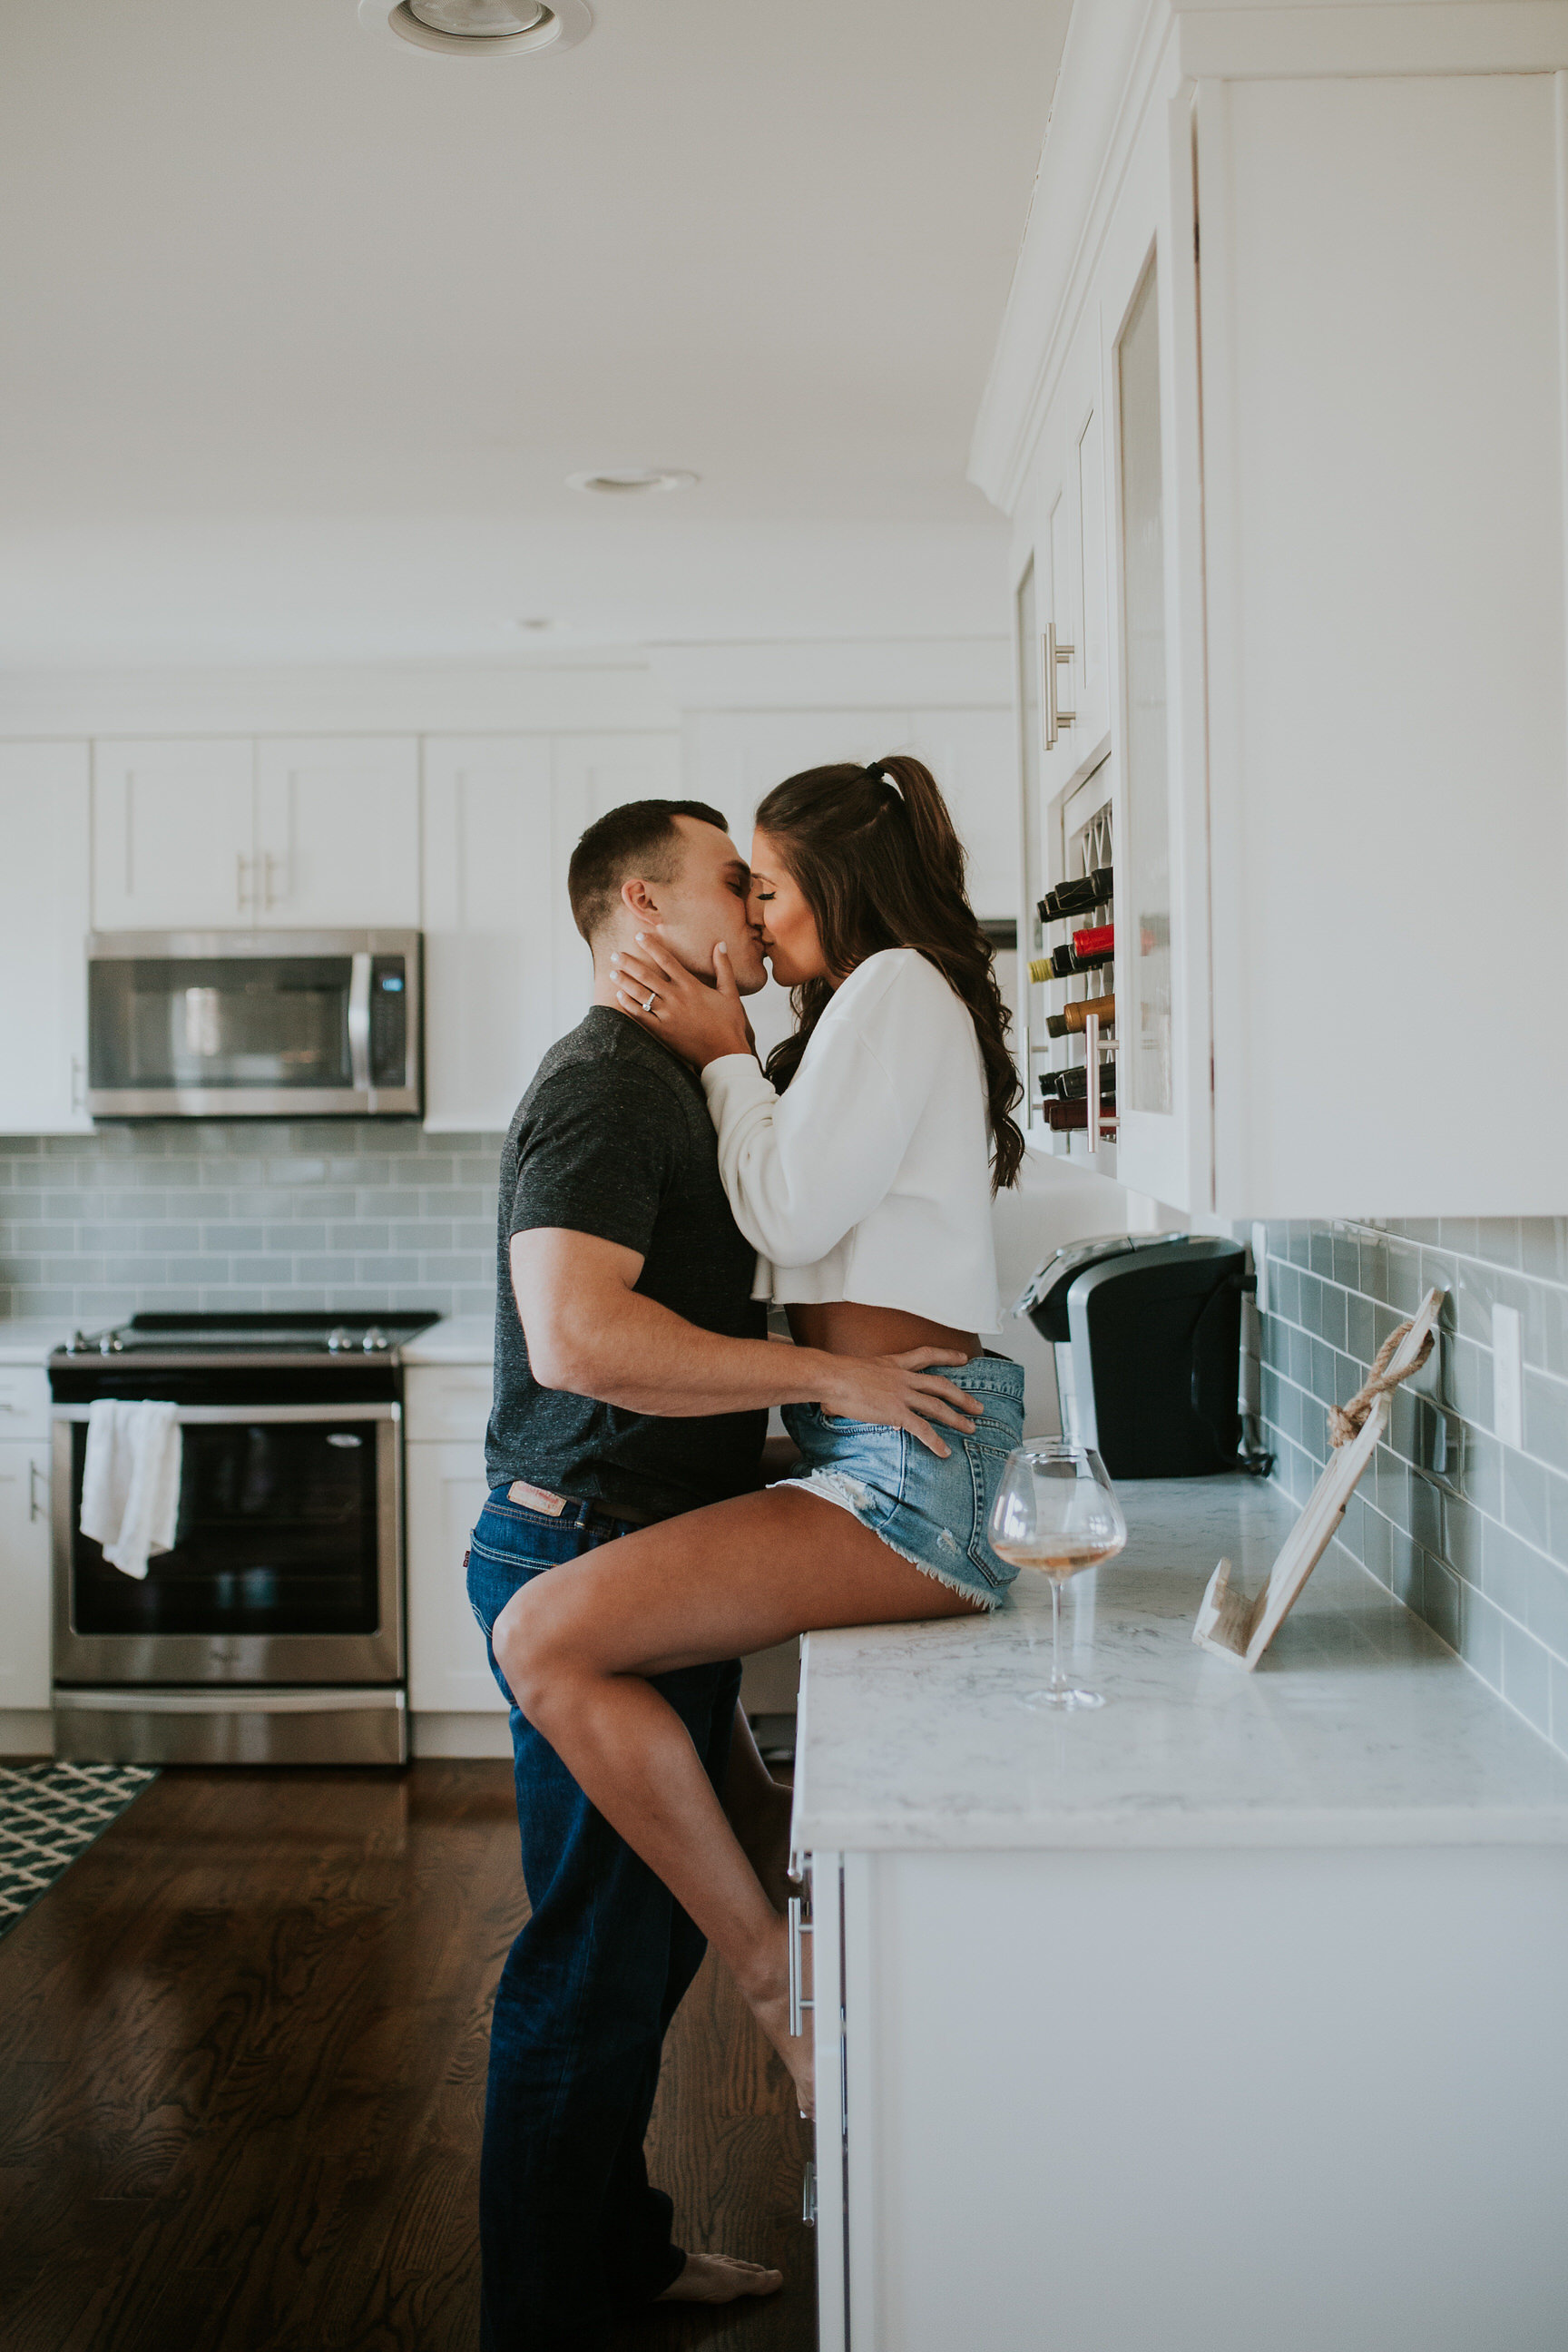 qualities of a healthy relationship, couples style, couples fashion, healthy relationship advice, couples advice, a southern drawl boyfriend, a southern drawl fiance, jordan white a southern drawl, couples photos, engagement session, engagement photos, couples session, healthy relationship qualities // grace wainwright a southern drawl